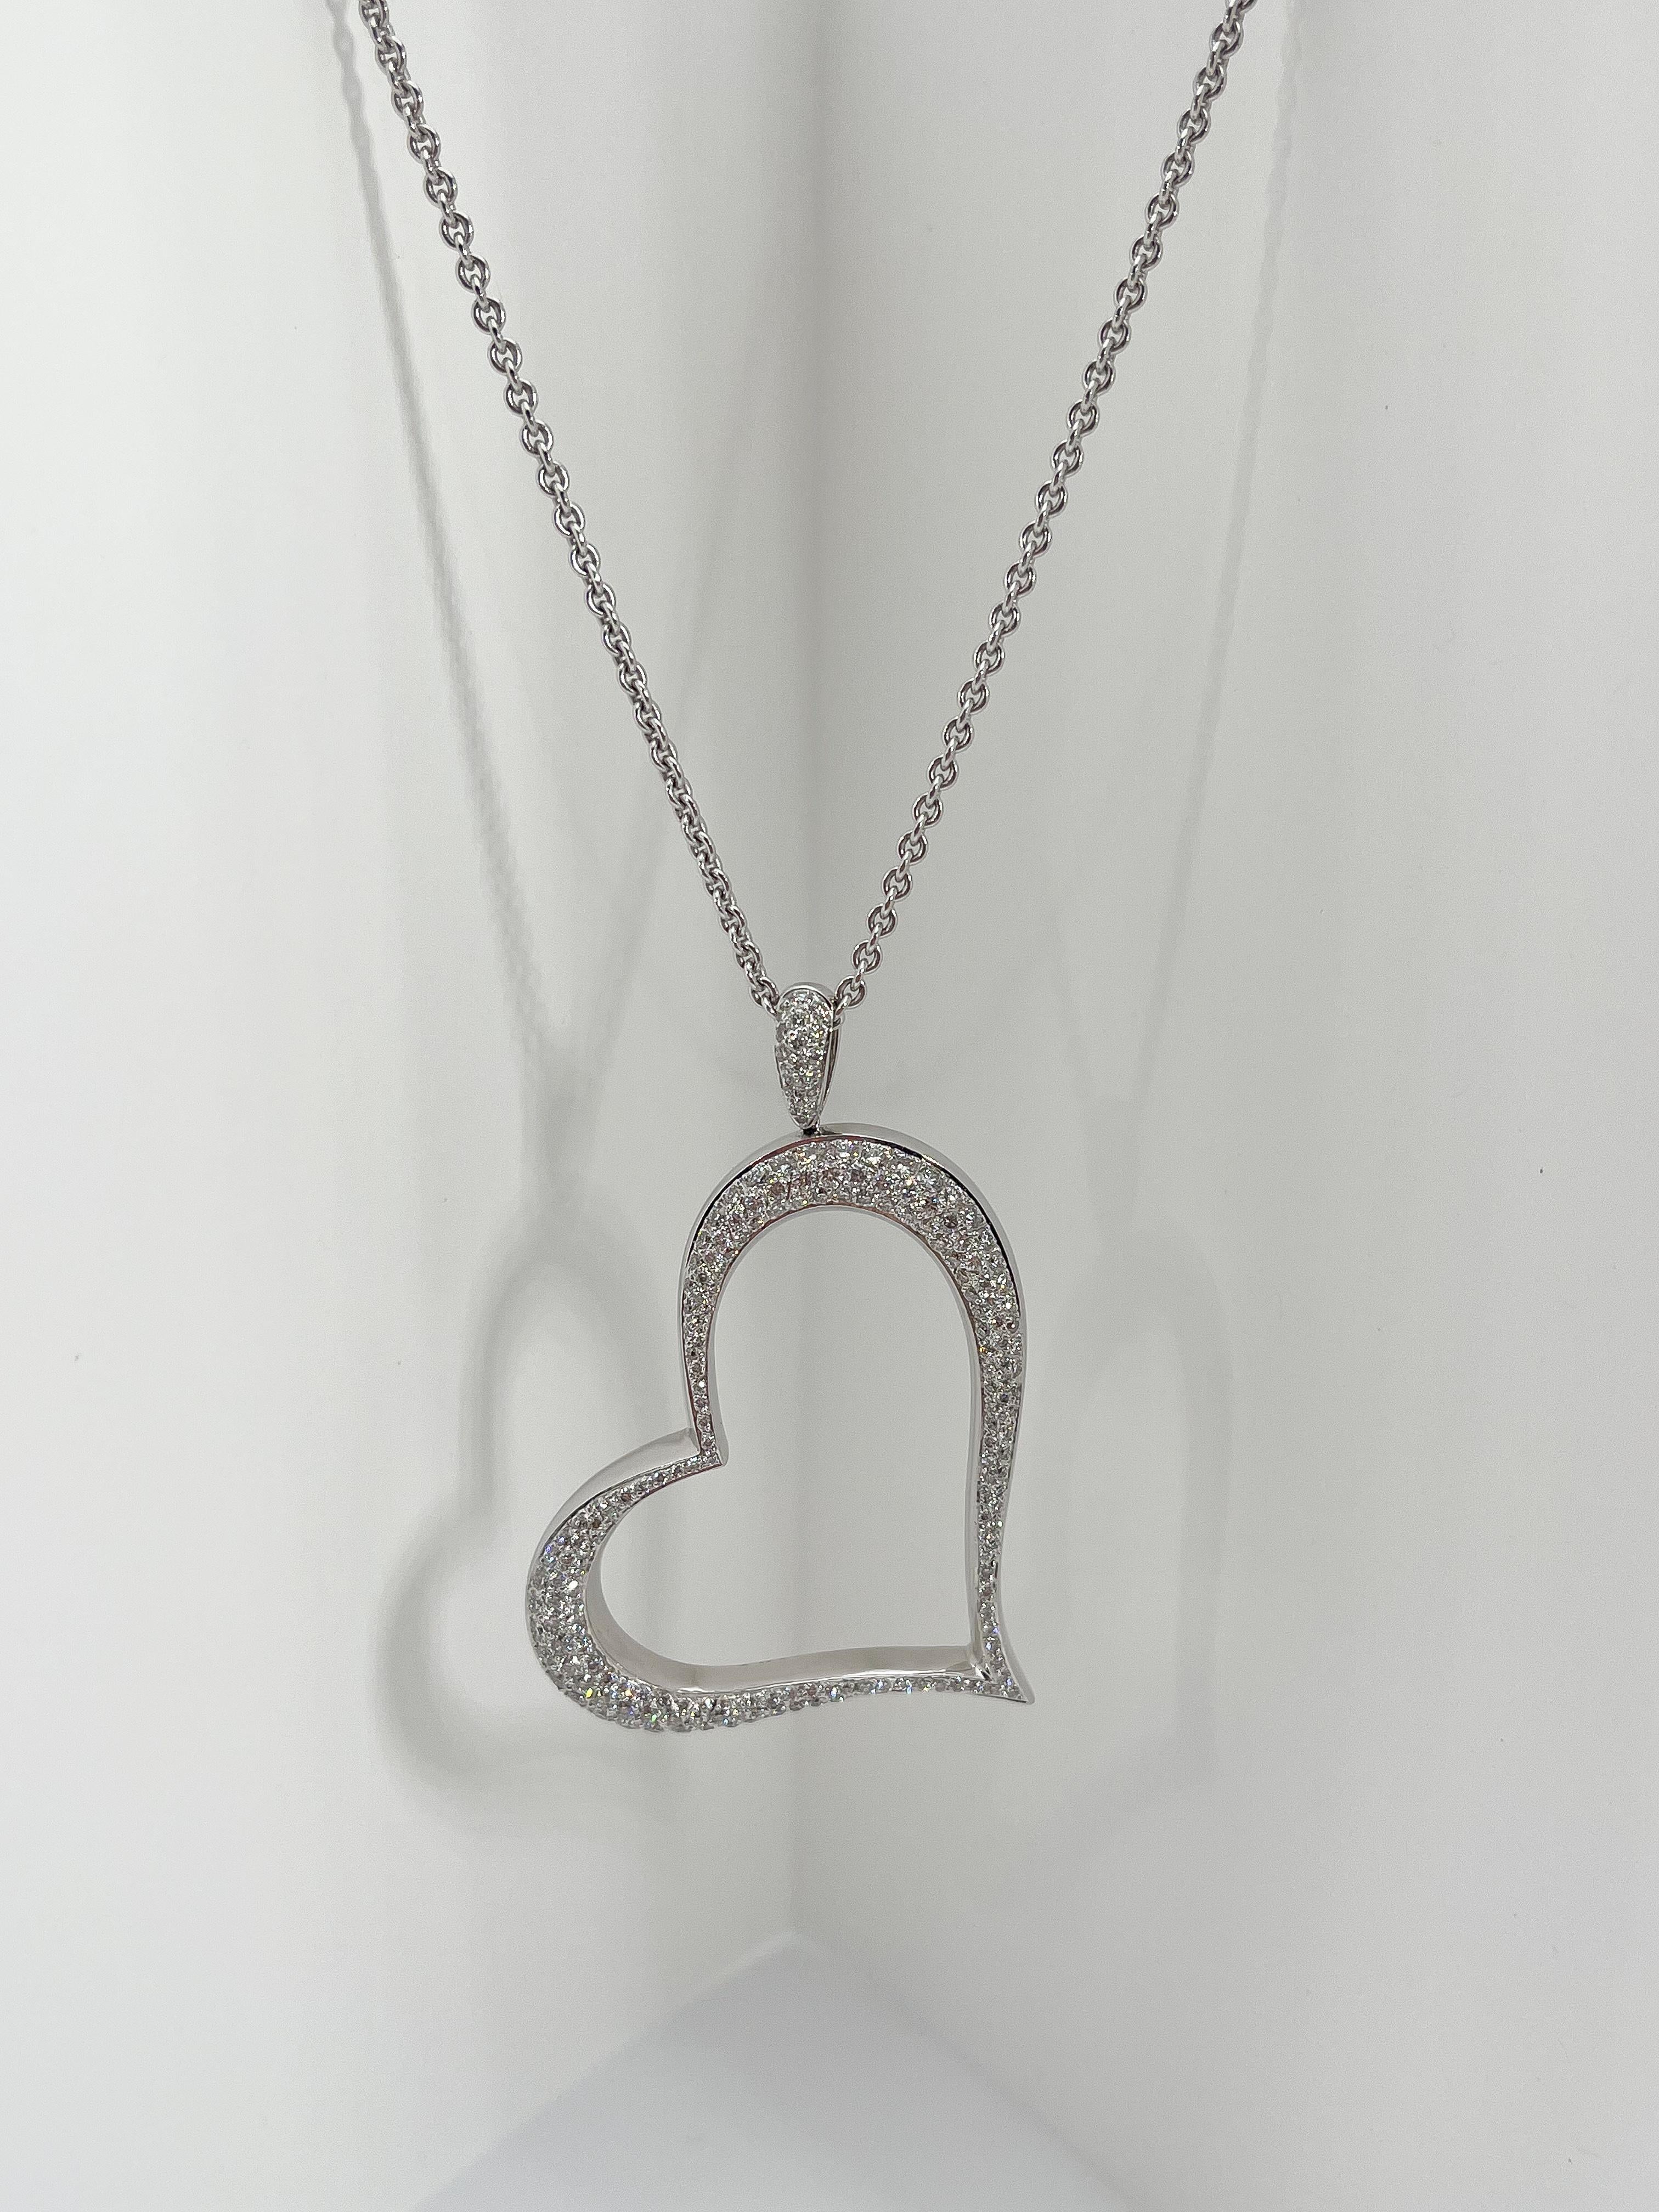 One of a kind 18K white gold diamond pave' contemporary heart necklace 2.36 ctw vs2 G-H color. 16 inch cable chain is included with pendant  Pendant measures 2x1.3 inches and the necklace weighs 23.2 grams. 